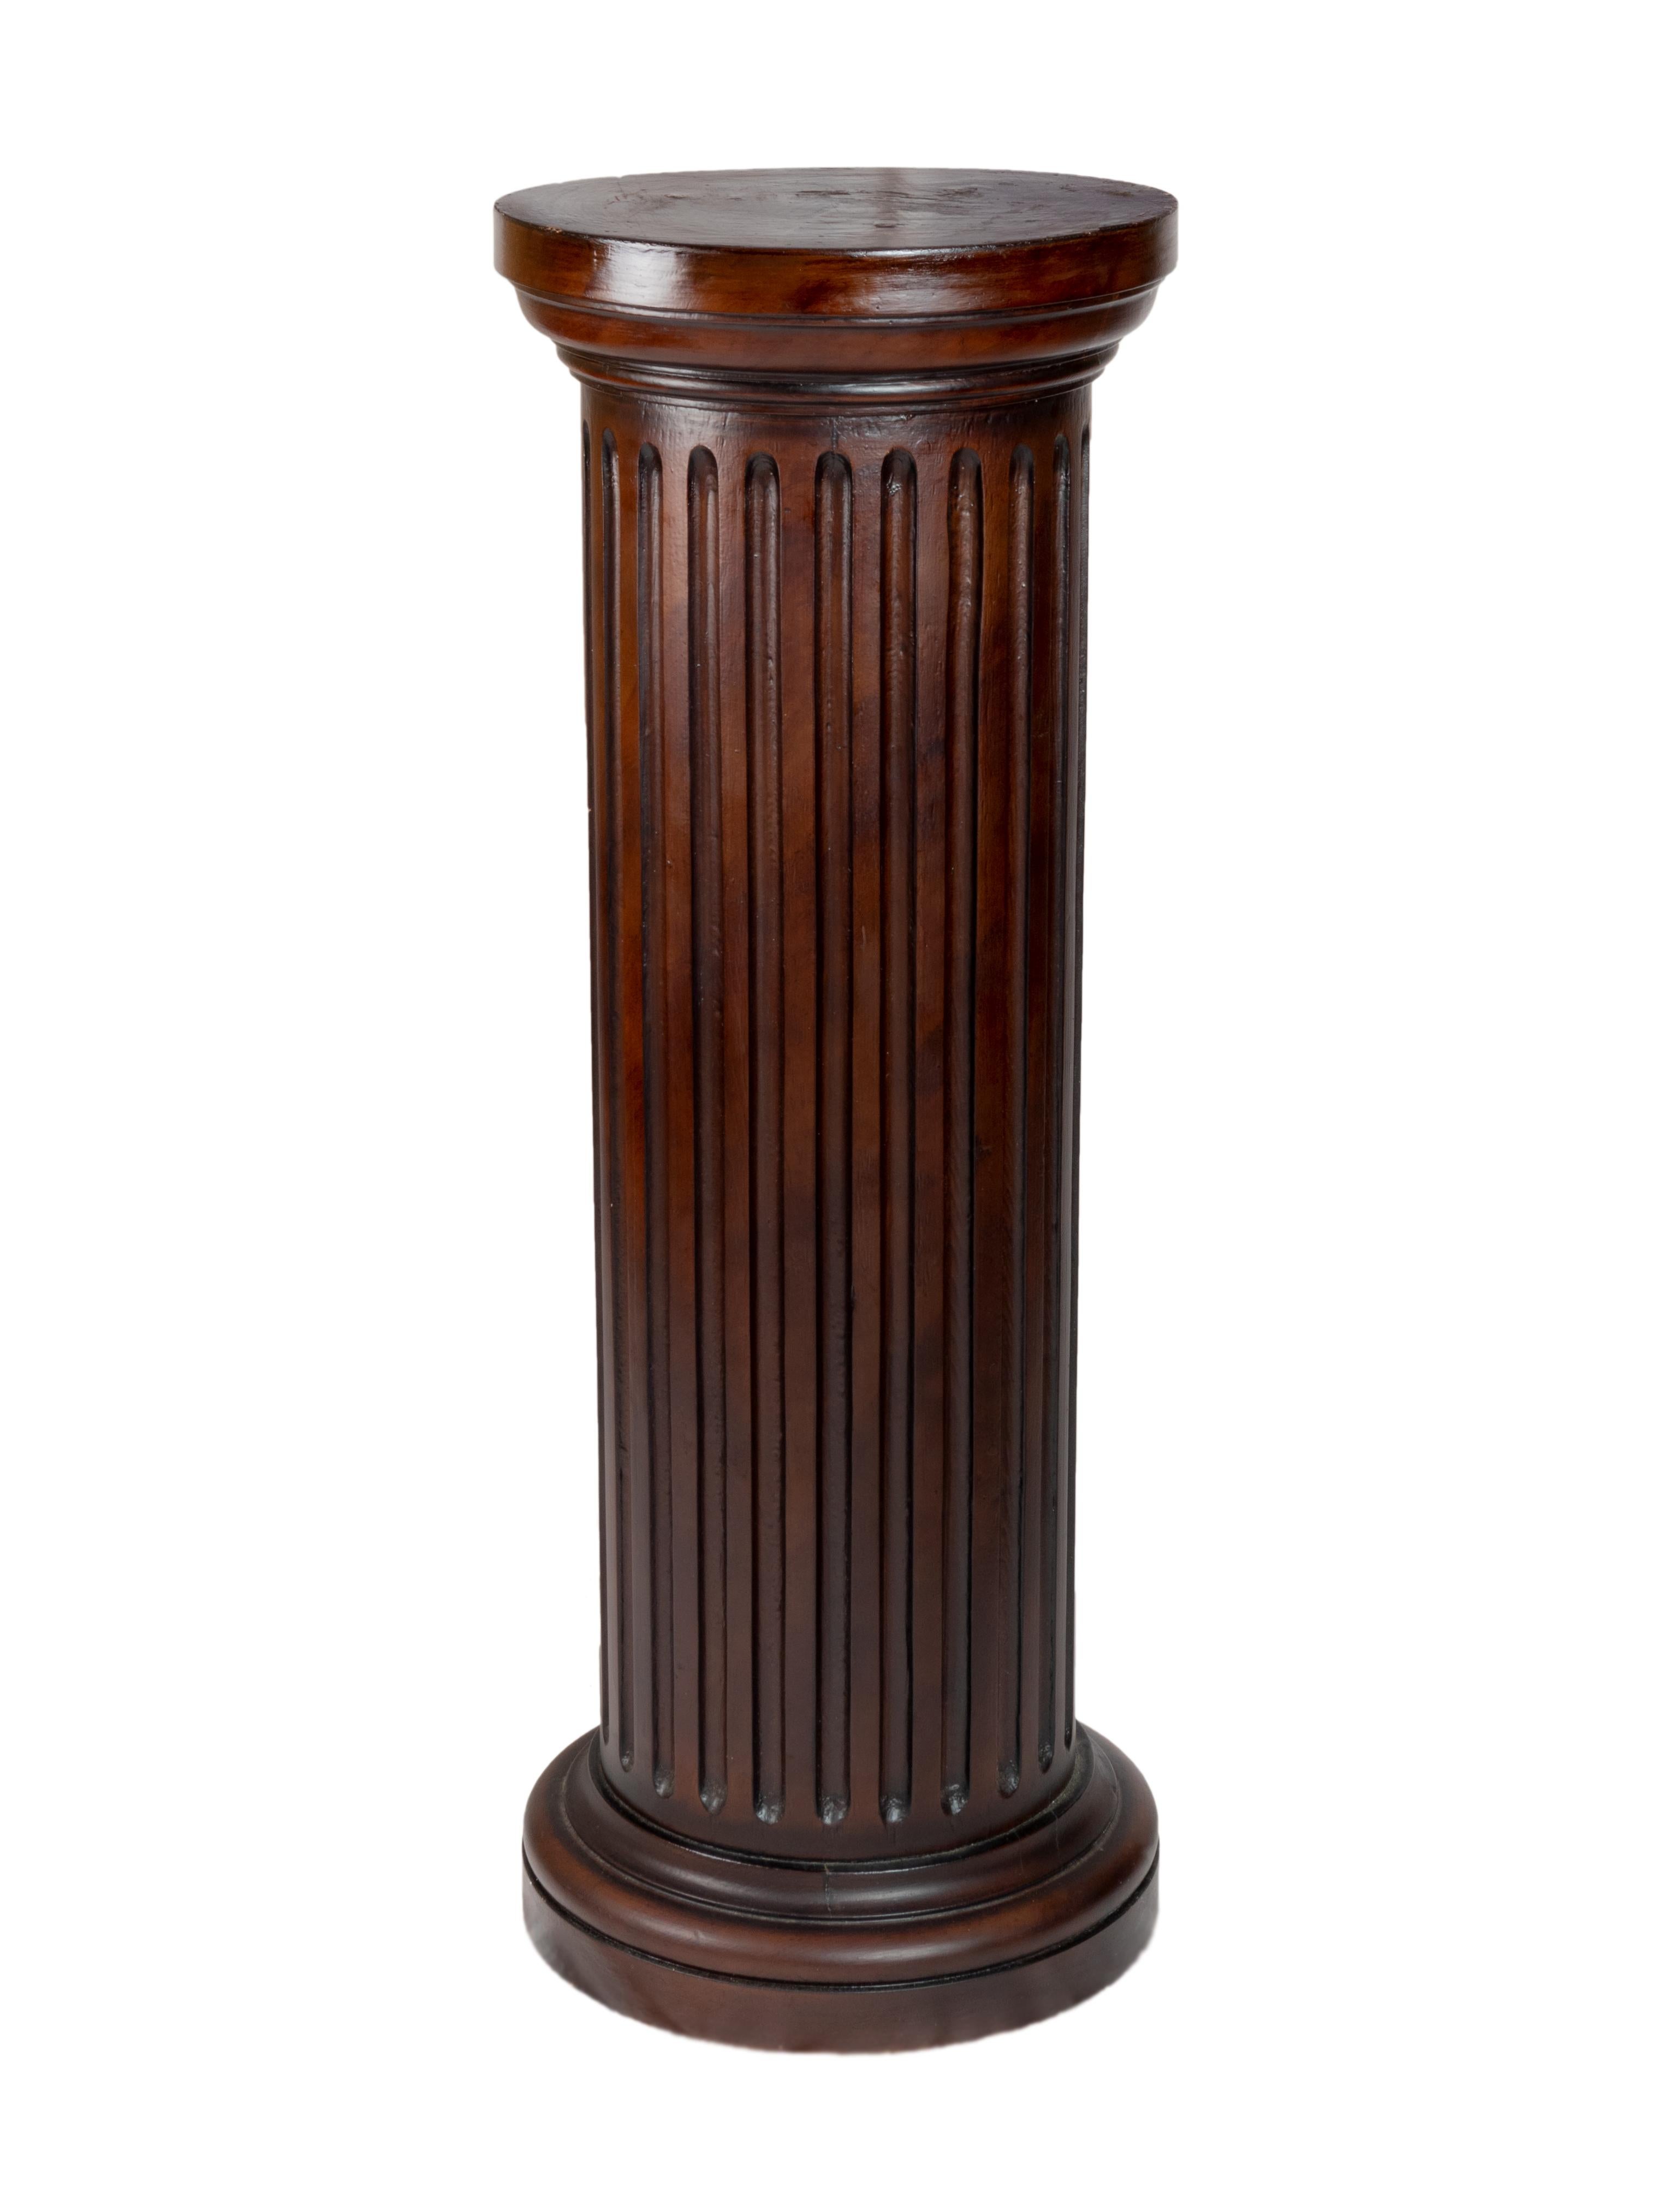 A classical pair of wooden pillars in reddish brown color lacquered doucine finish, fluted details and horizontal cornice, doric inspired columns.  

Height 39,52 in (100,4 cm)
Diameter 14,76 in (37,5 cm)